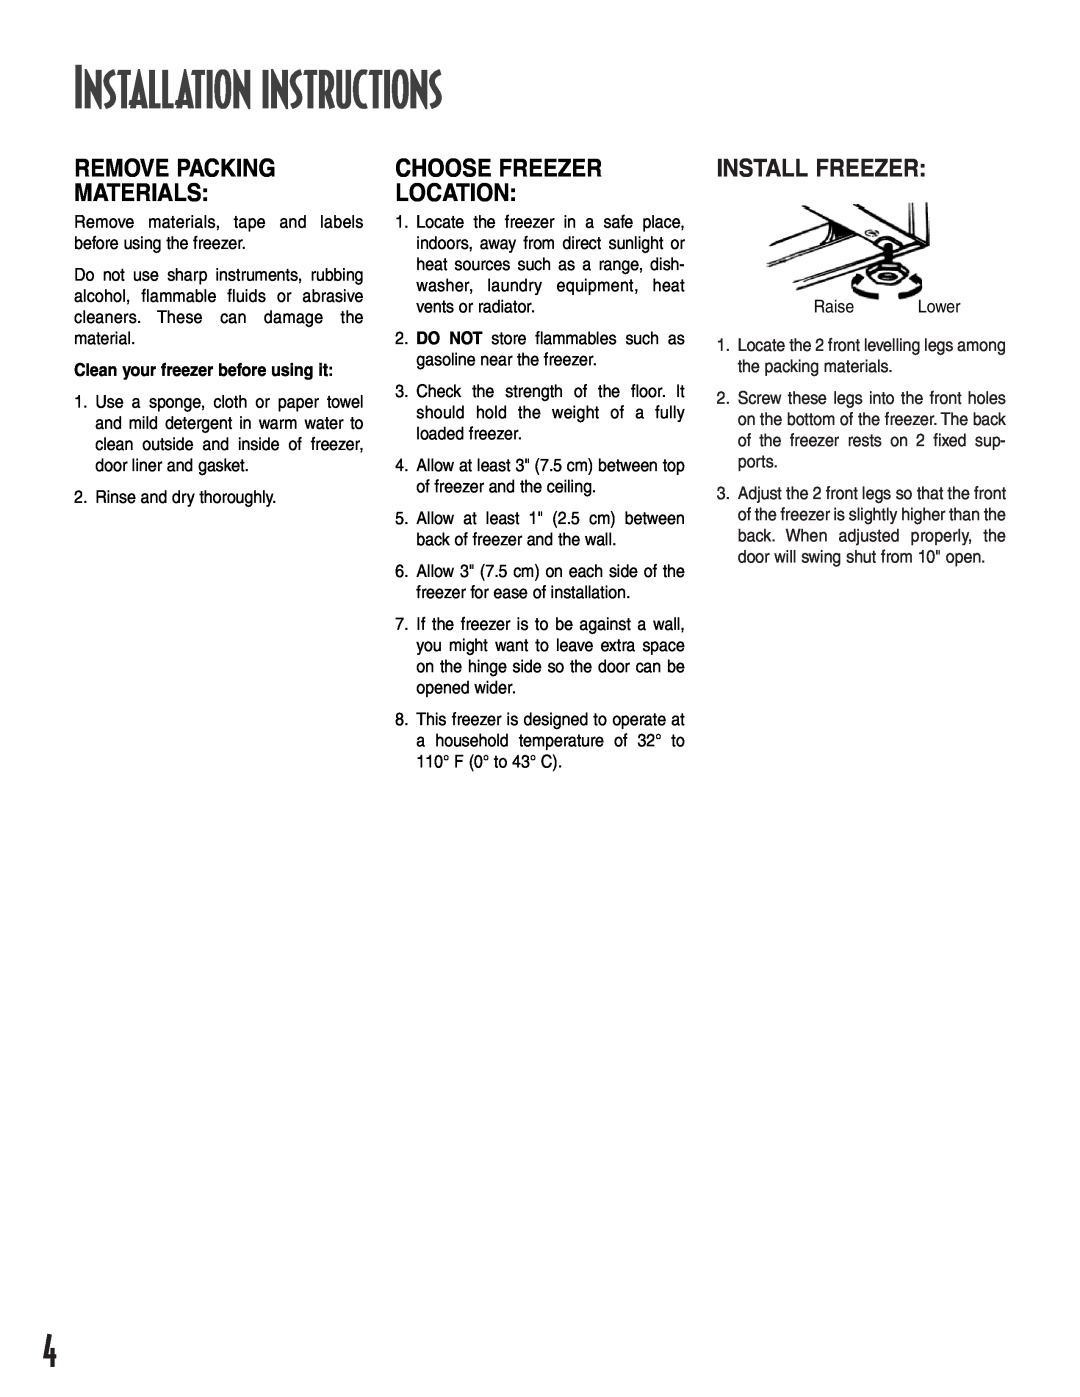 Amana 1-82034-002 Installation instructions, Remove Packing Materials, Choose Freezer Location, Install Freezer 